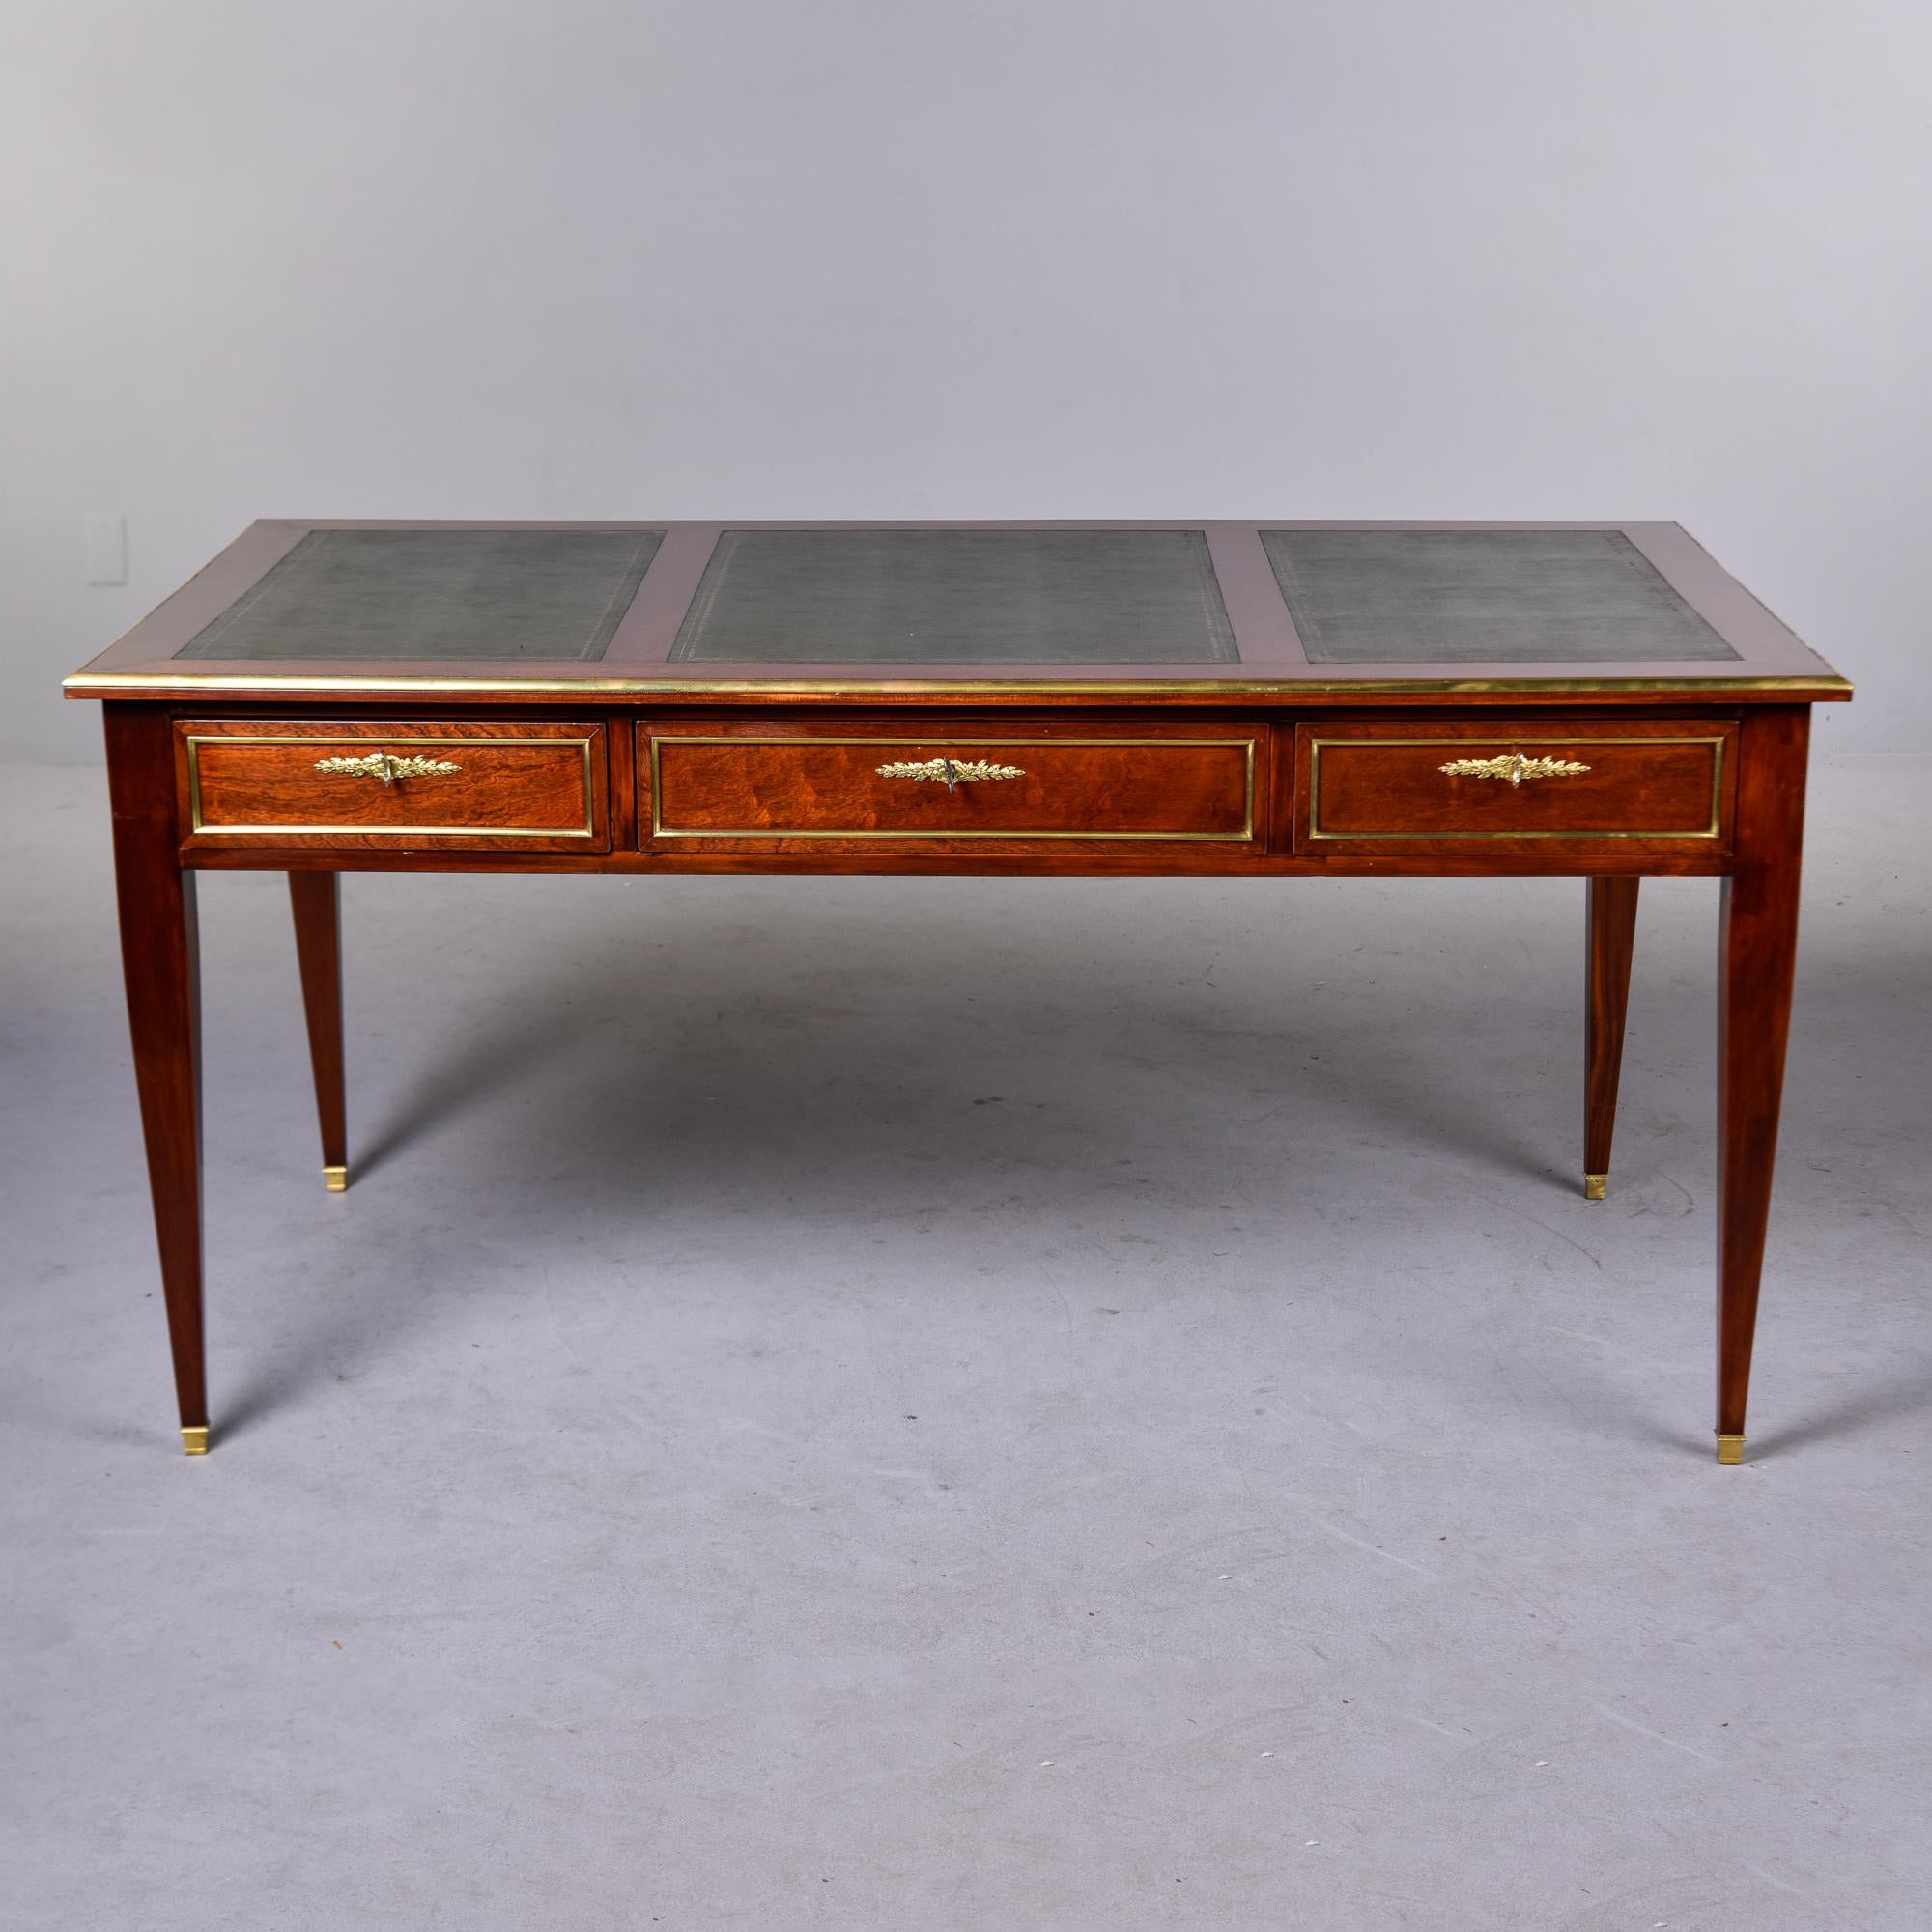 Found in France, this Louis XVI style mahogany desk dates from the 1830s. Generously sized at over five feet wide, this desk is finished on both sides and can float in a room. Front has three dovetail construction functional, locking drawers with